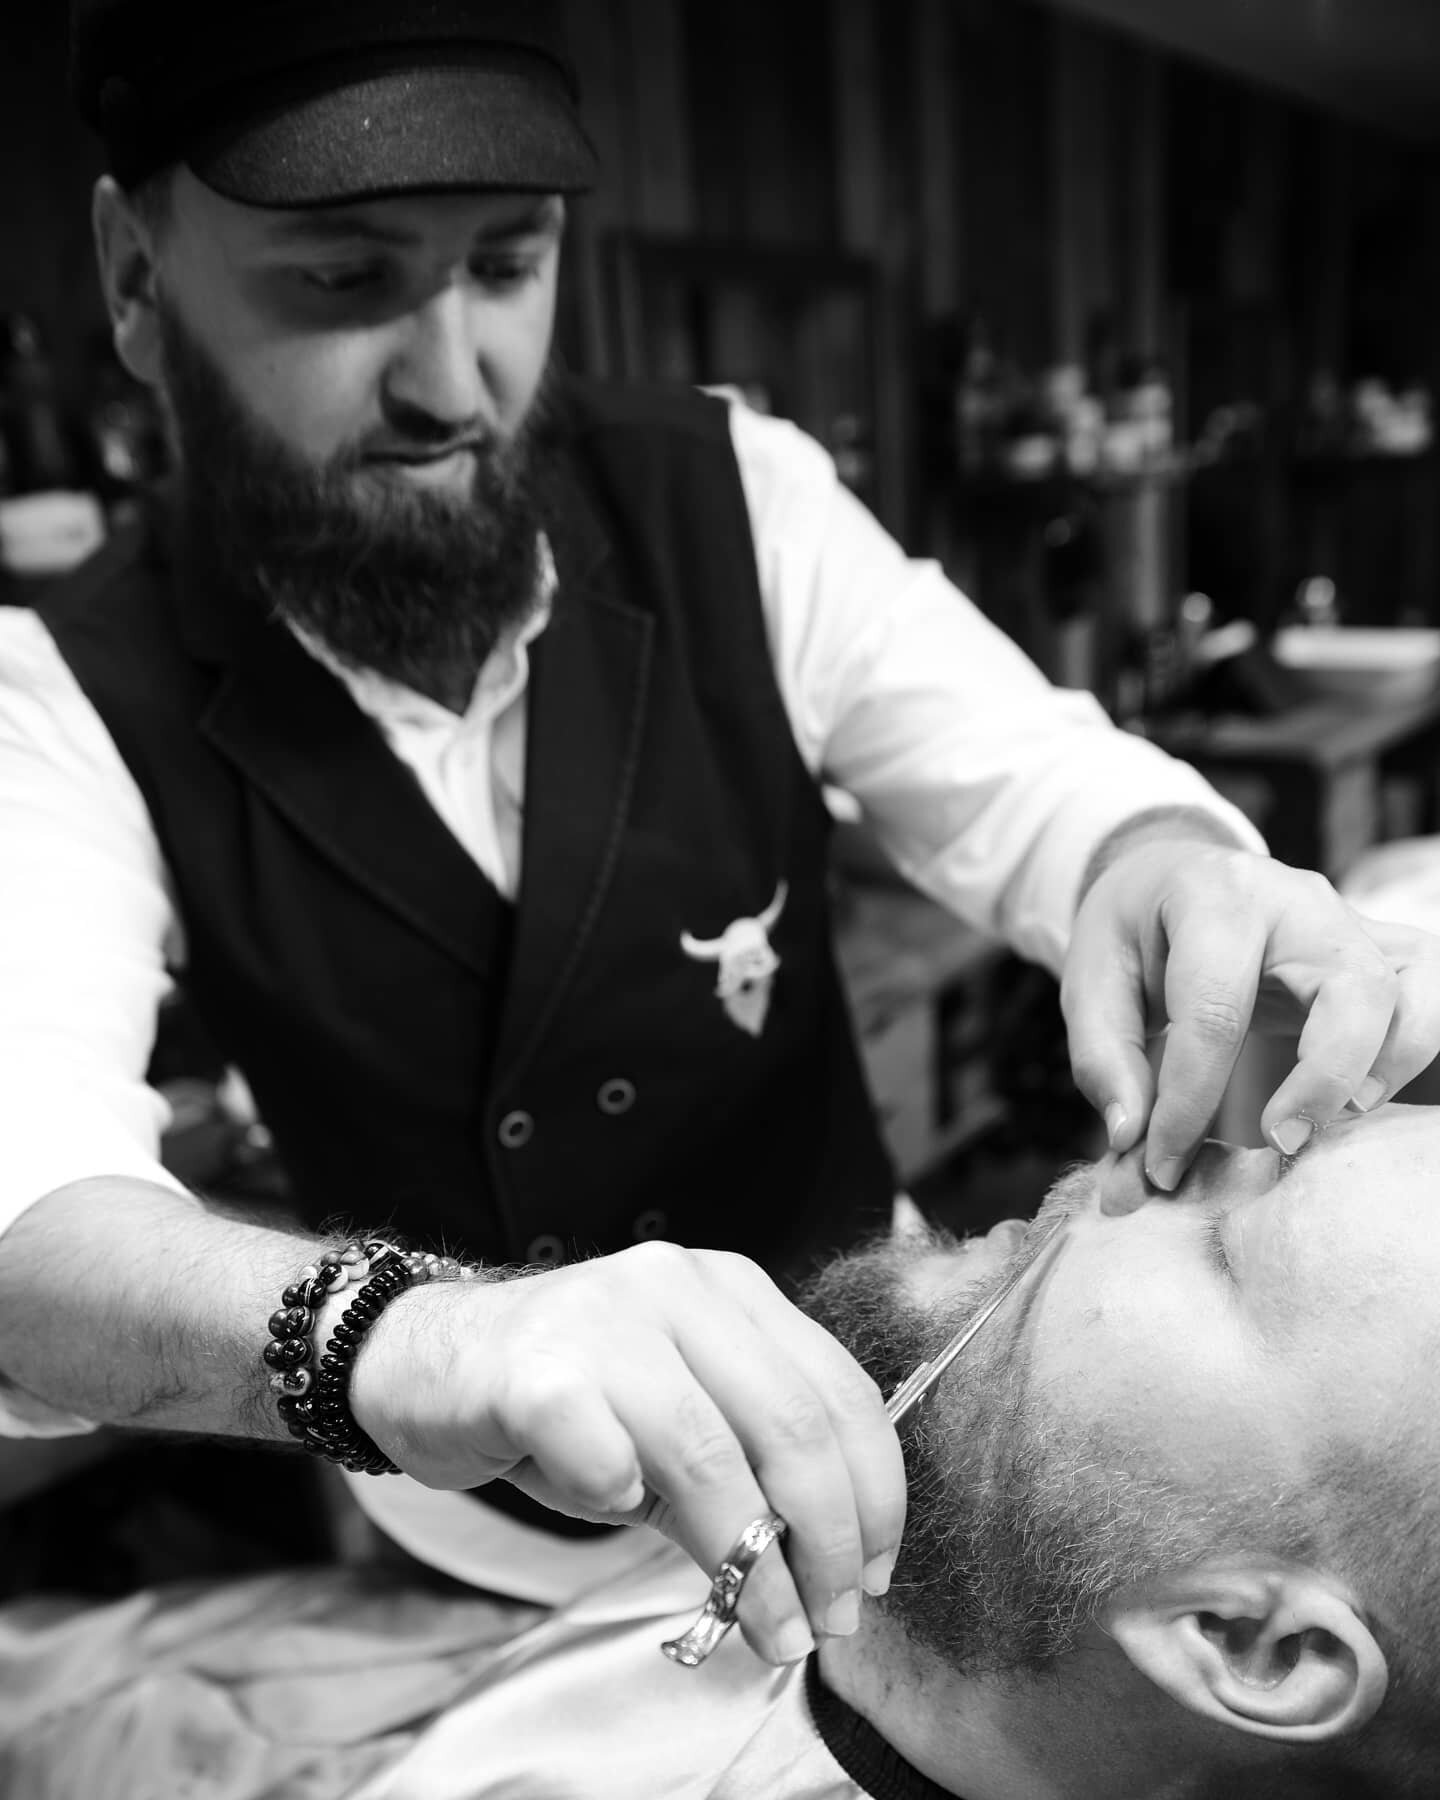 Are you ready for weekend ? We are open  longer every Friday 👌 Feel free to walk in 😁

#tonsorialparlor #arundel #westsussex #bestbarbershop #hair #male #maletrends #barbering #barberlife #fadegame #luxury #style #hairtrends #grooming #internationa